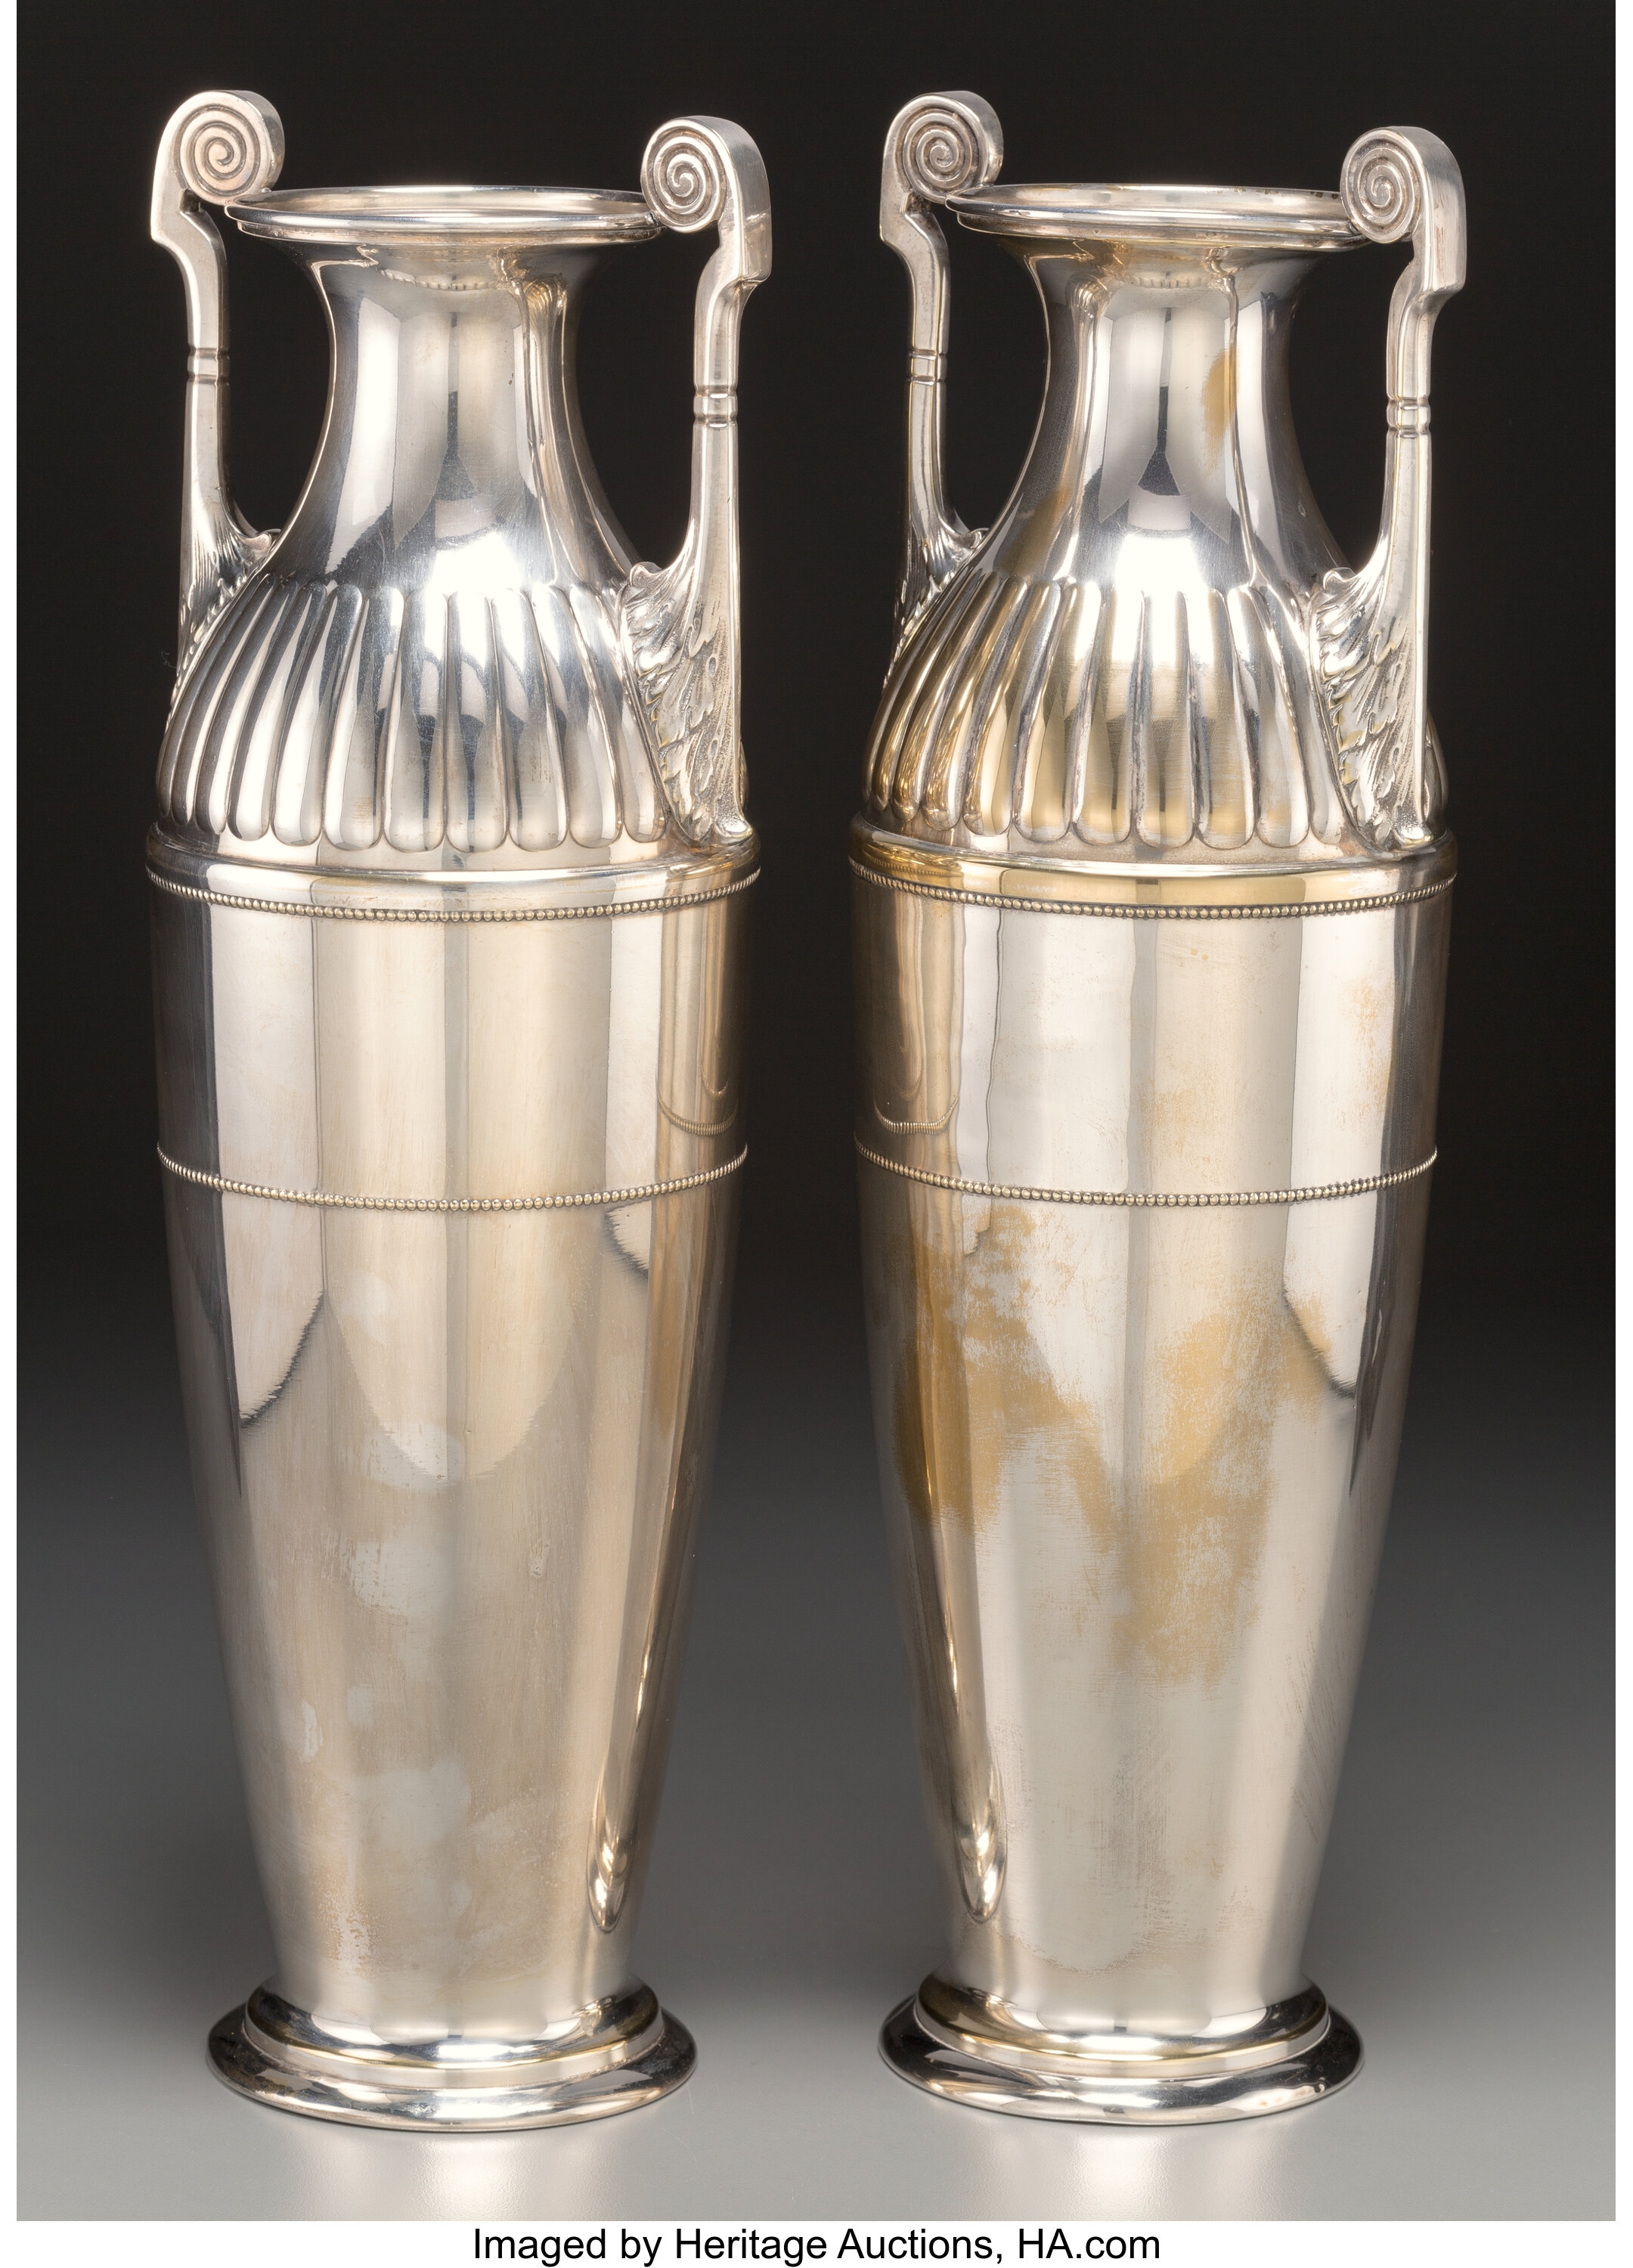 A Pair of WMF Neoclassical Silver-Plated Urn-Form Vases, | Lot